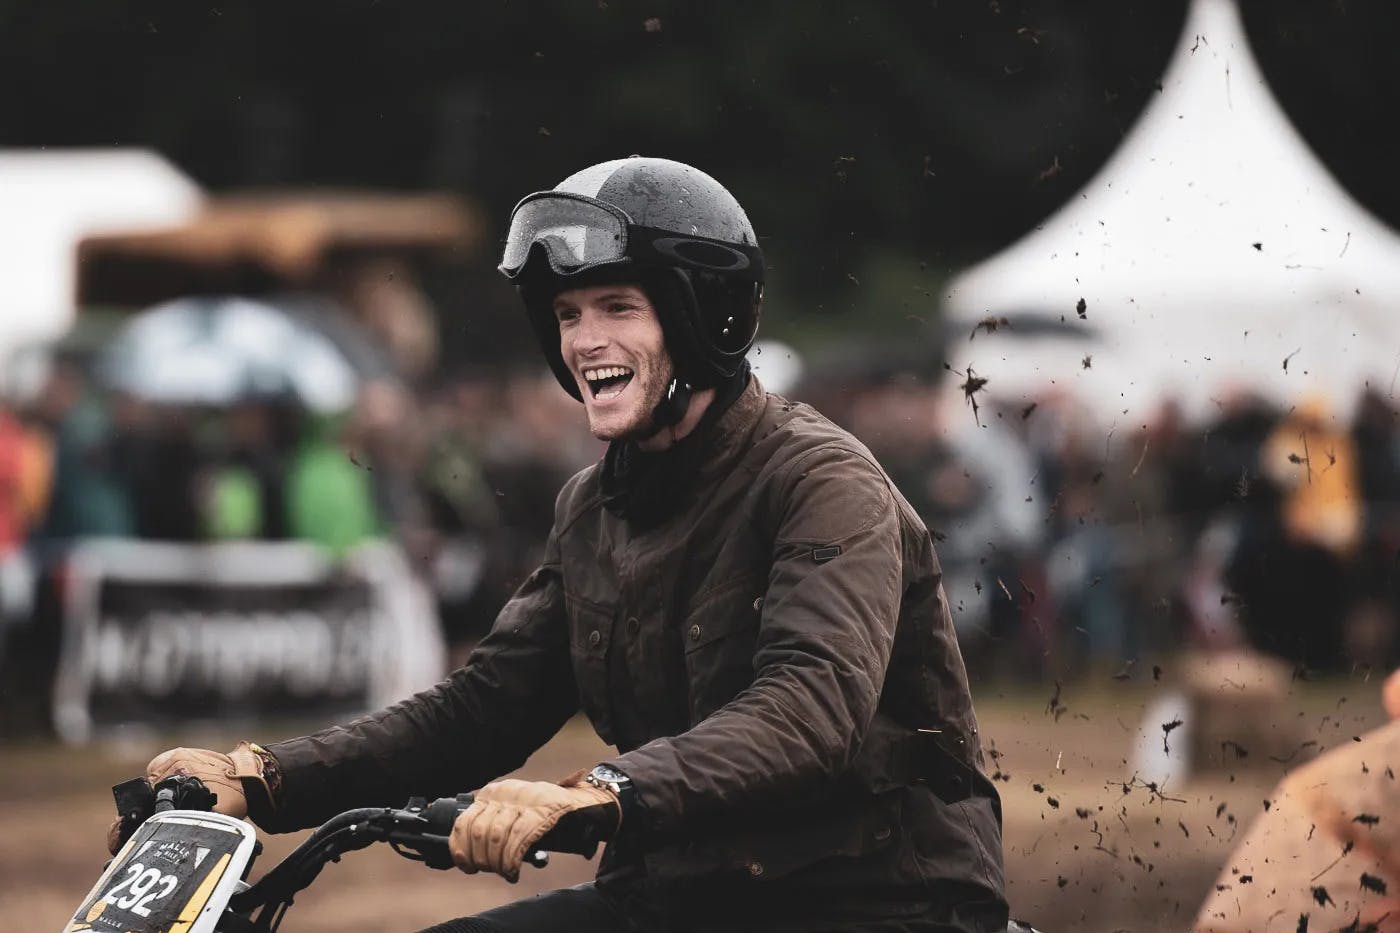 Guy smiling in his dirbike before a race in London